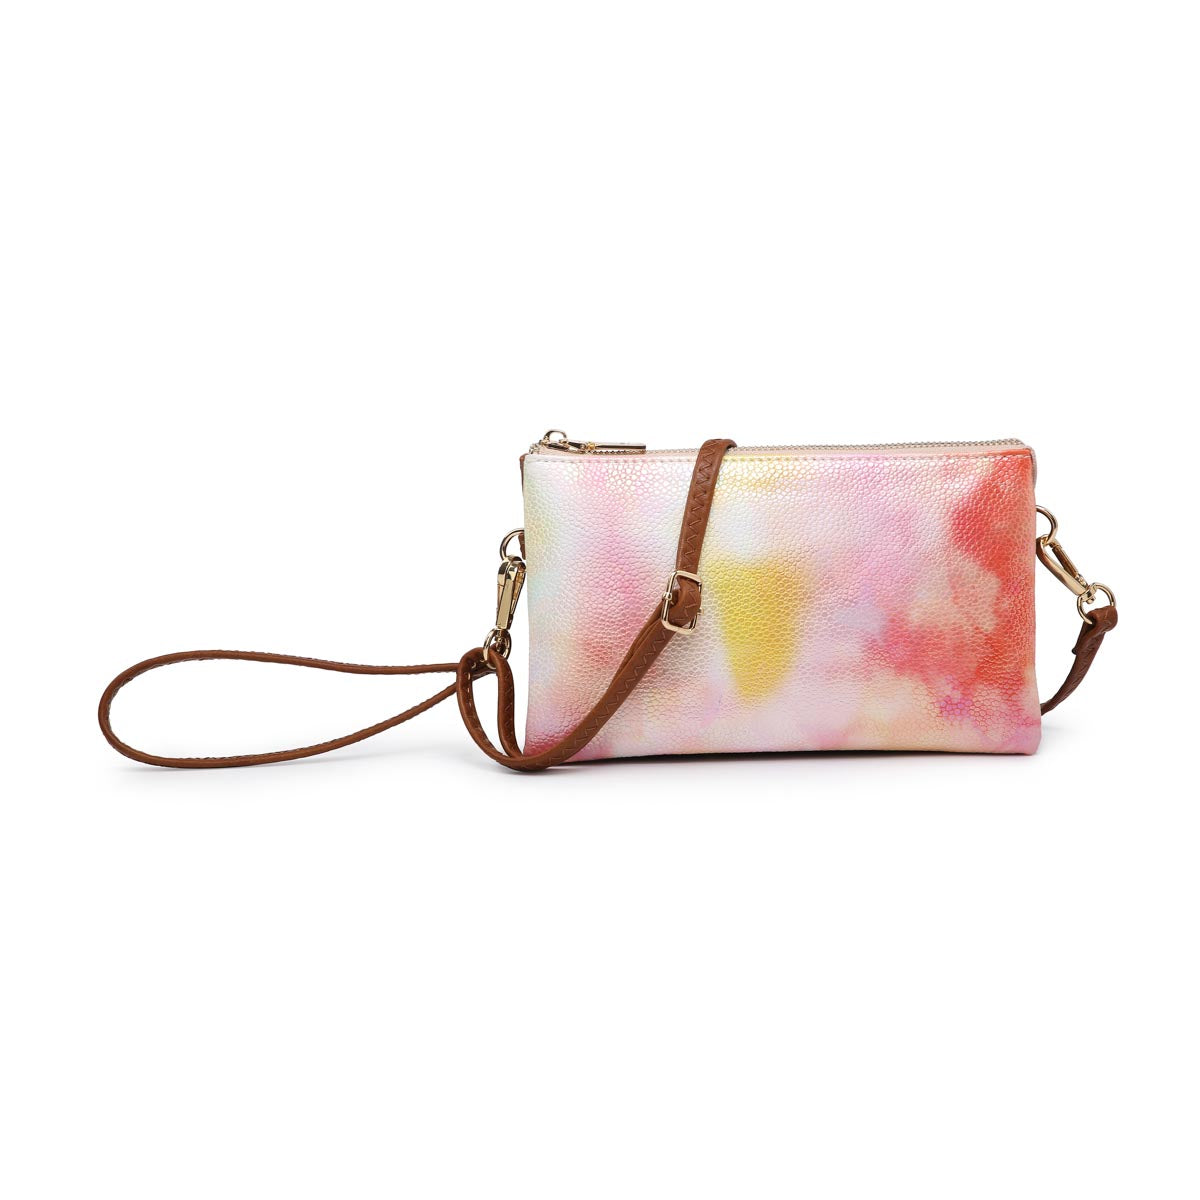 Tie Dye Compartment Wristlet Crossbody in Coral/Yellow